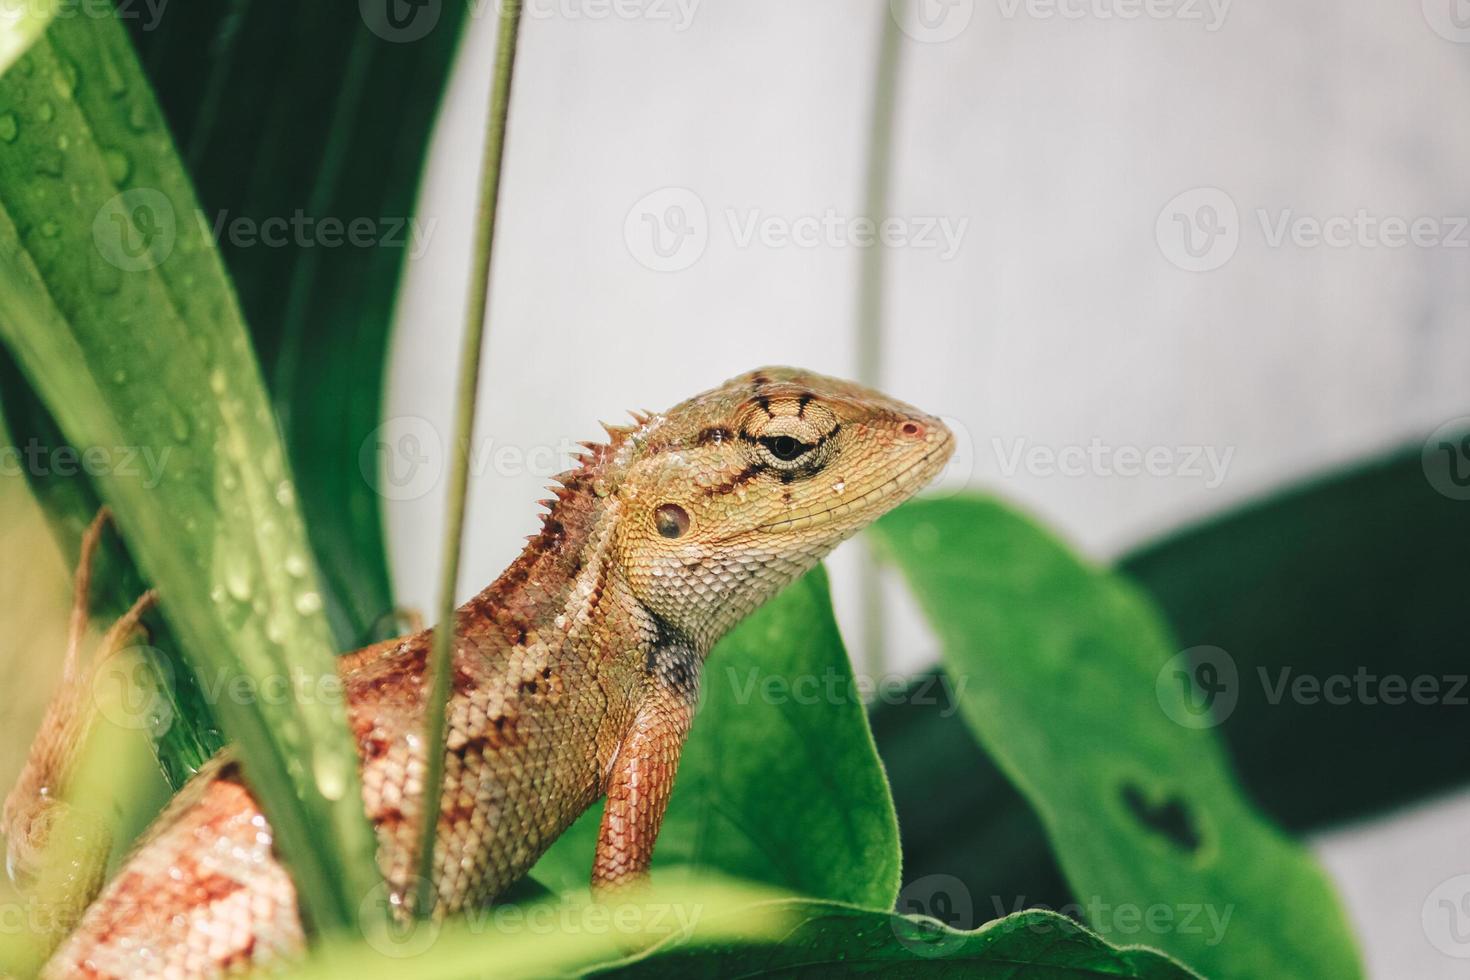 Oriental garden fence lizard or Calotes versicolor sitting on a branch in the tropical jungle. Asian lizard on a blurred background of green forest. Animal of Asia, reptile photo